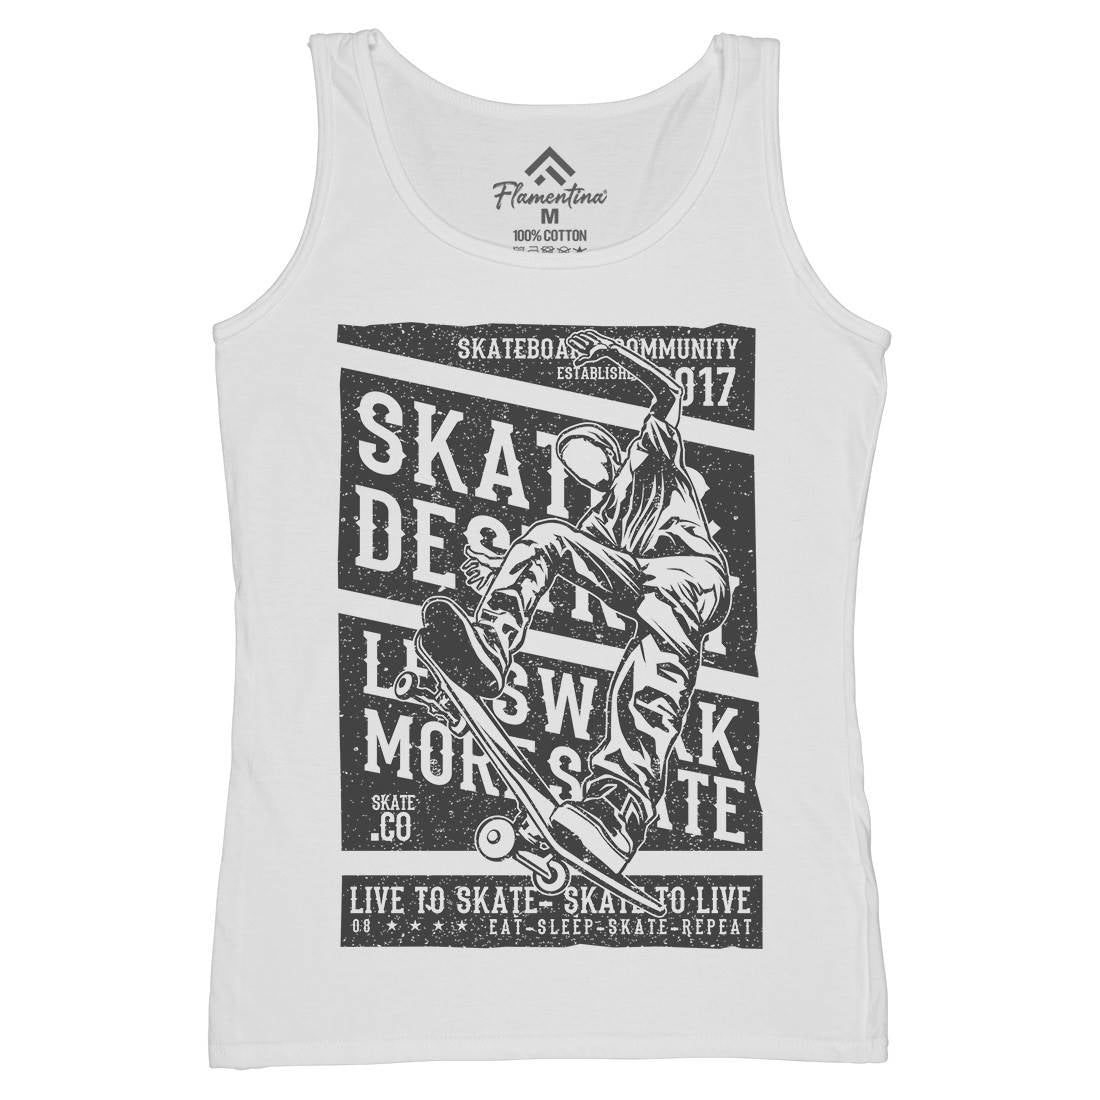 Live To Womens Organic Tank Top Vest Skate A708